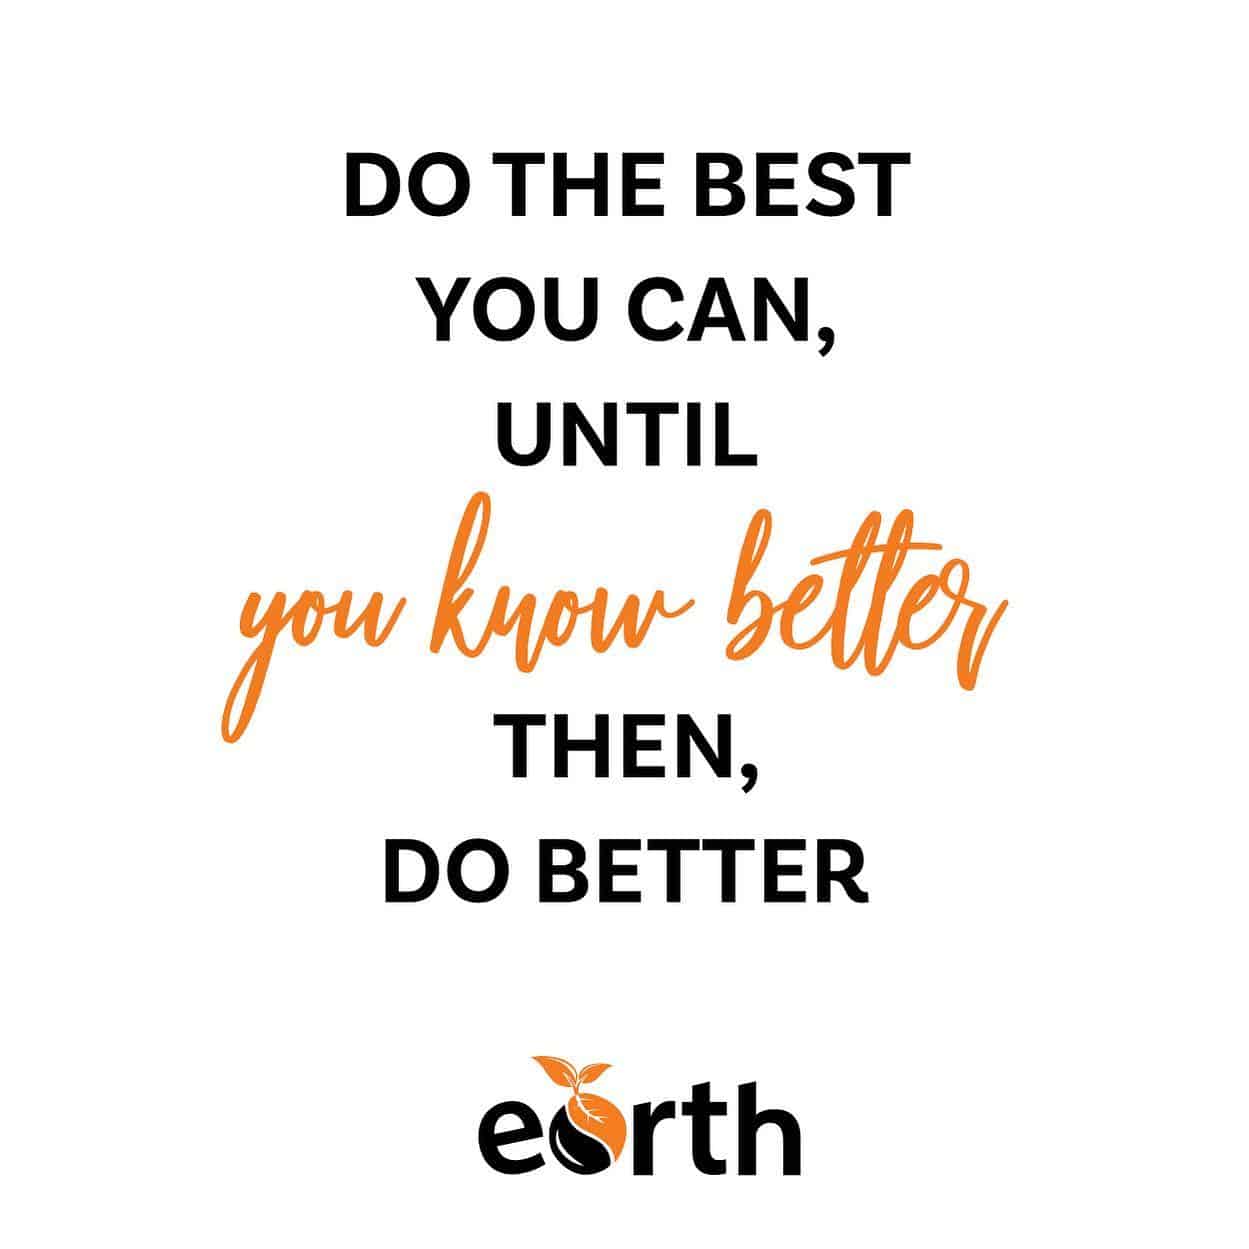 Do the Best You Can Until You know better - then do better